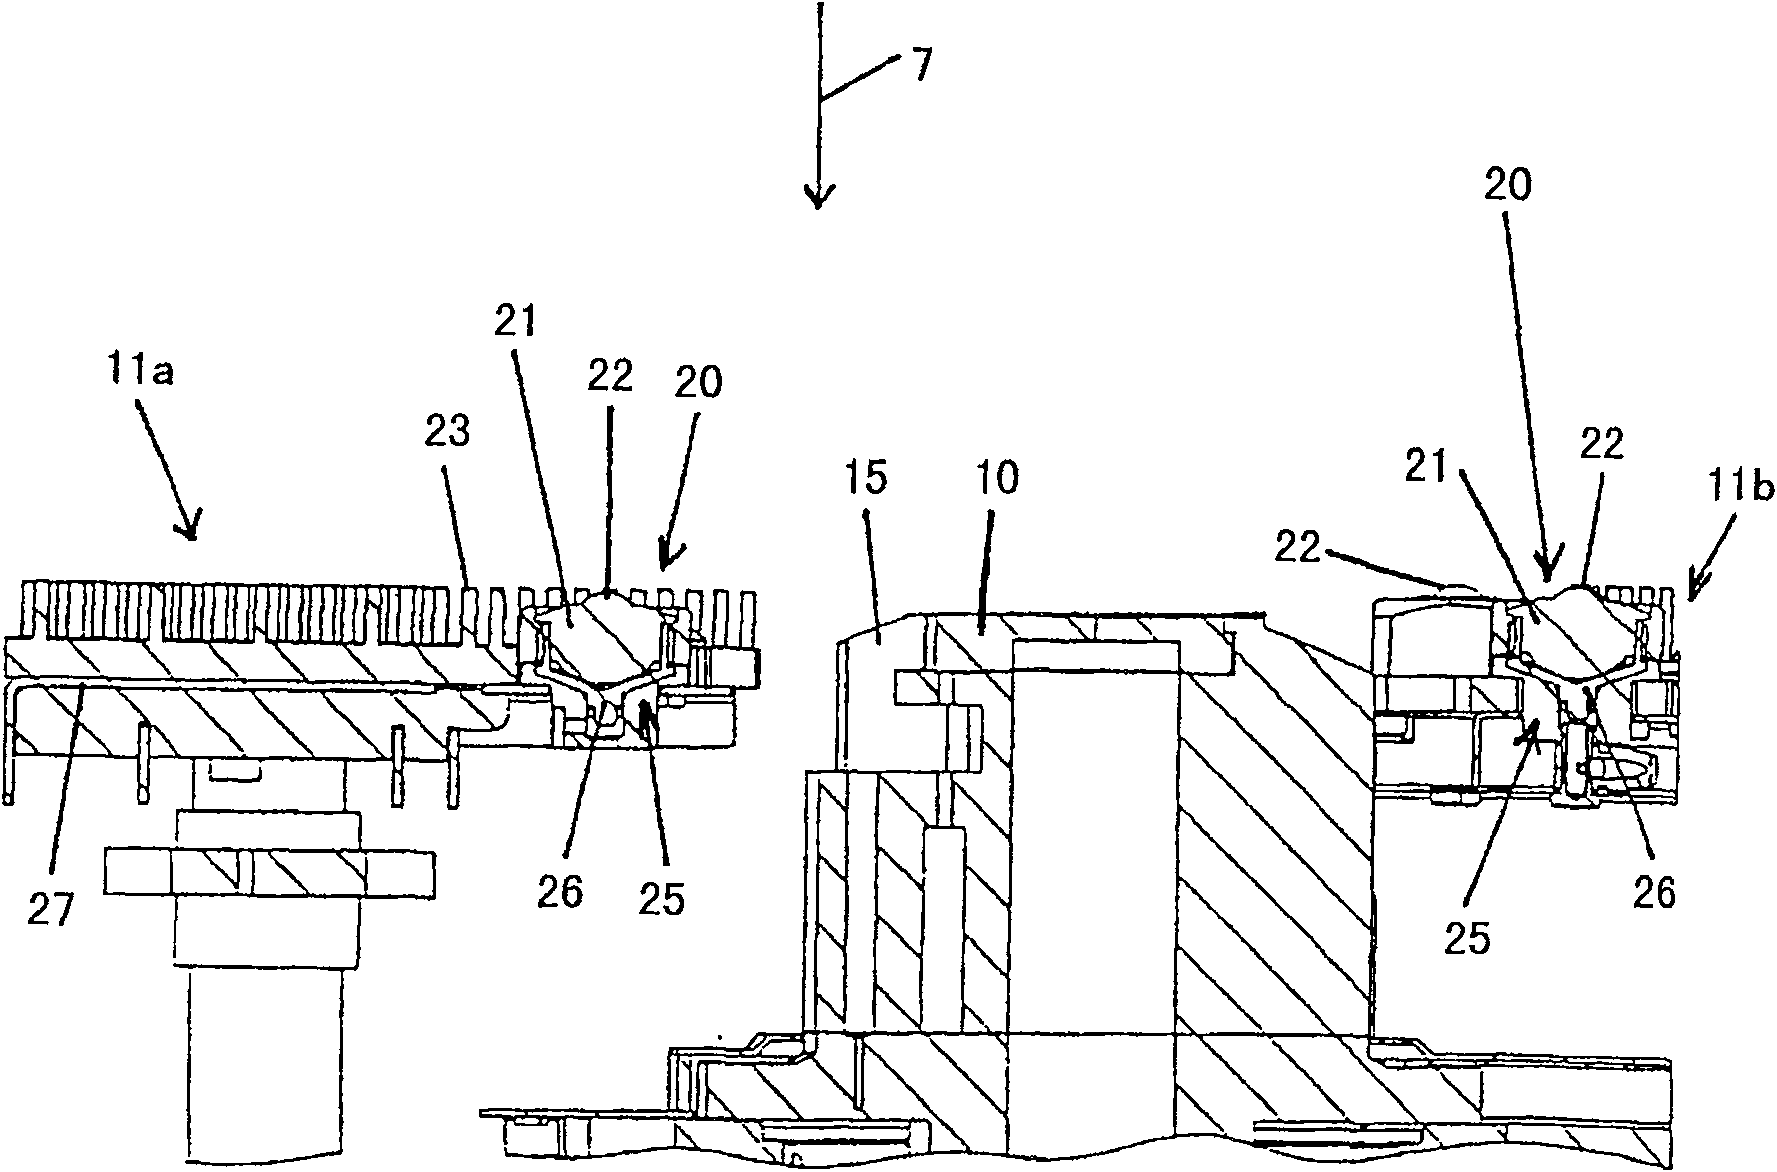 Stamping machine with elastic supporting work piece support and method for supporting work piece in the stamping machine